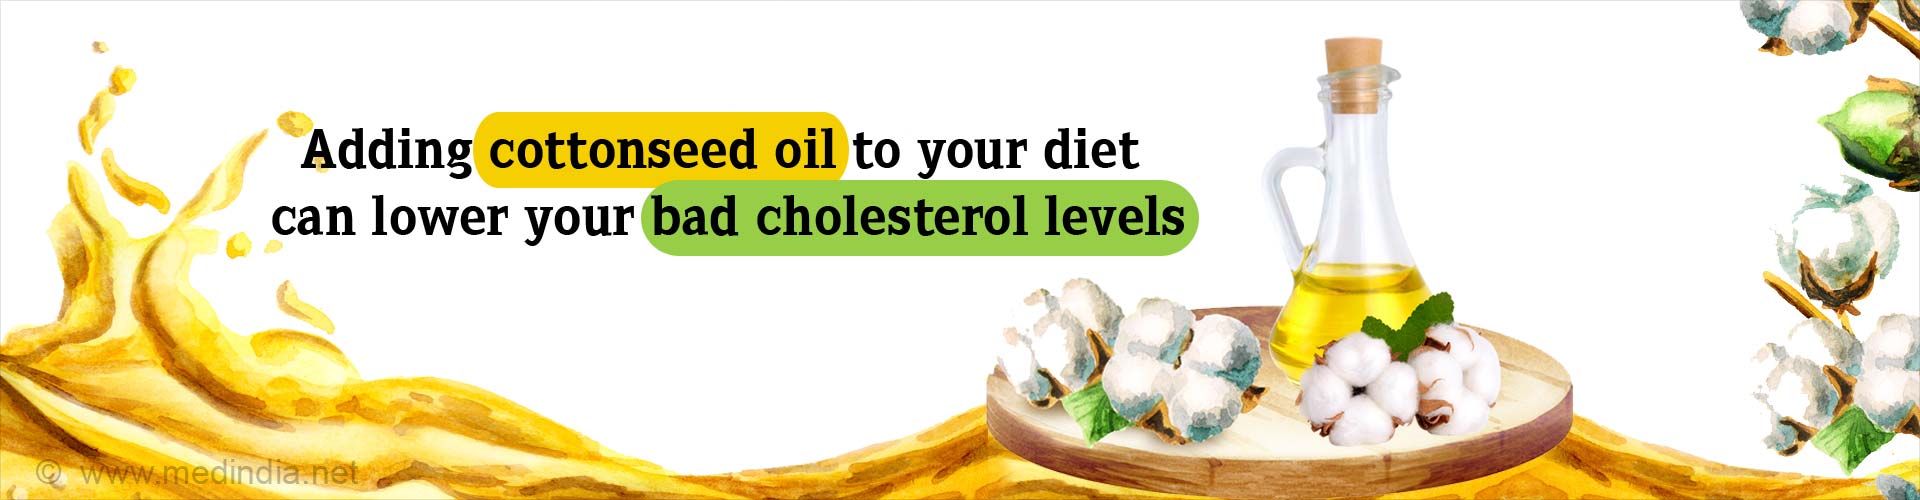 Adding cottonseed oil to your diet can lower your bad cholesterol levels.